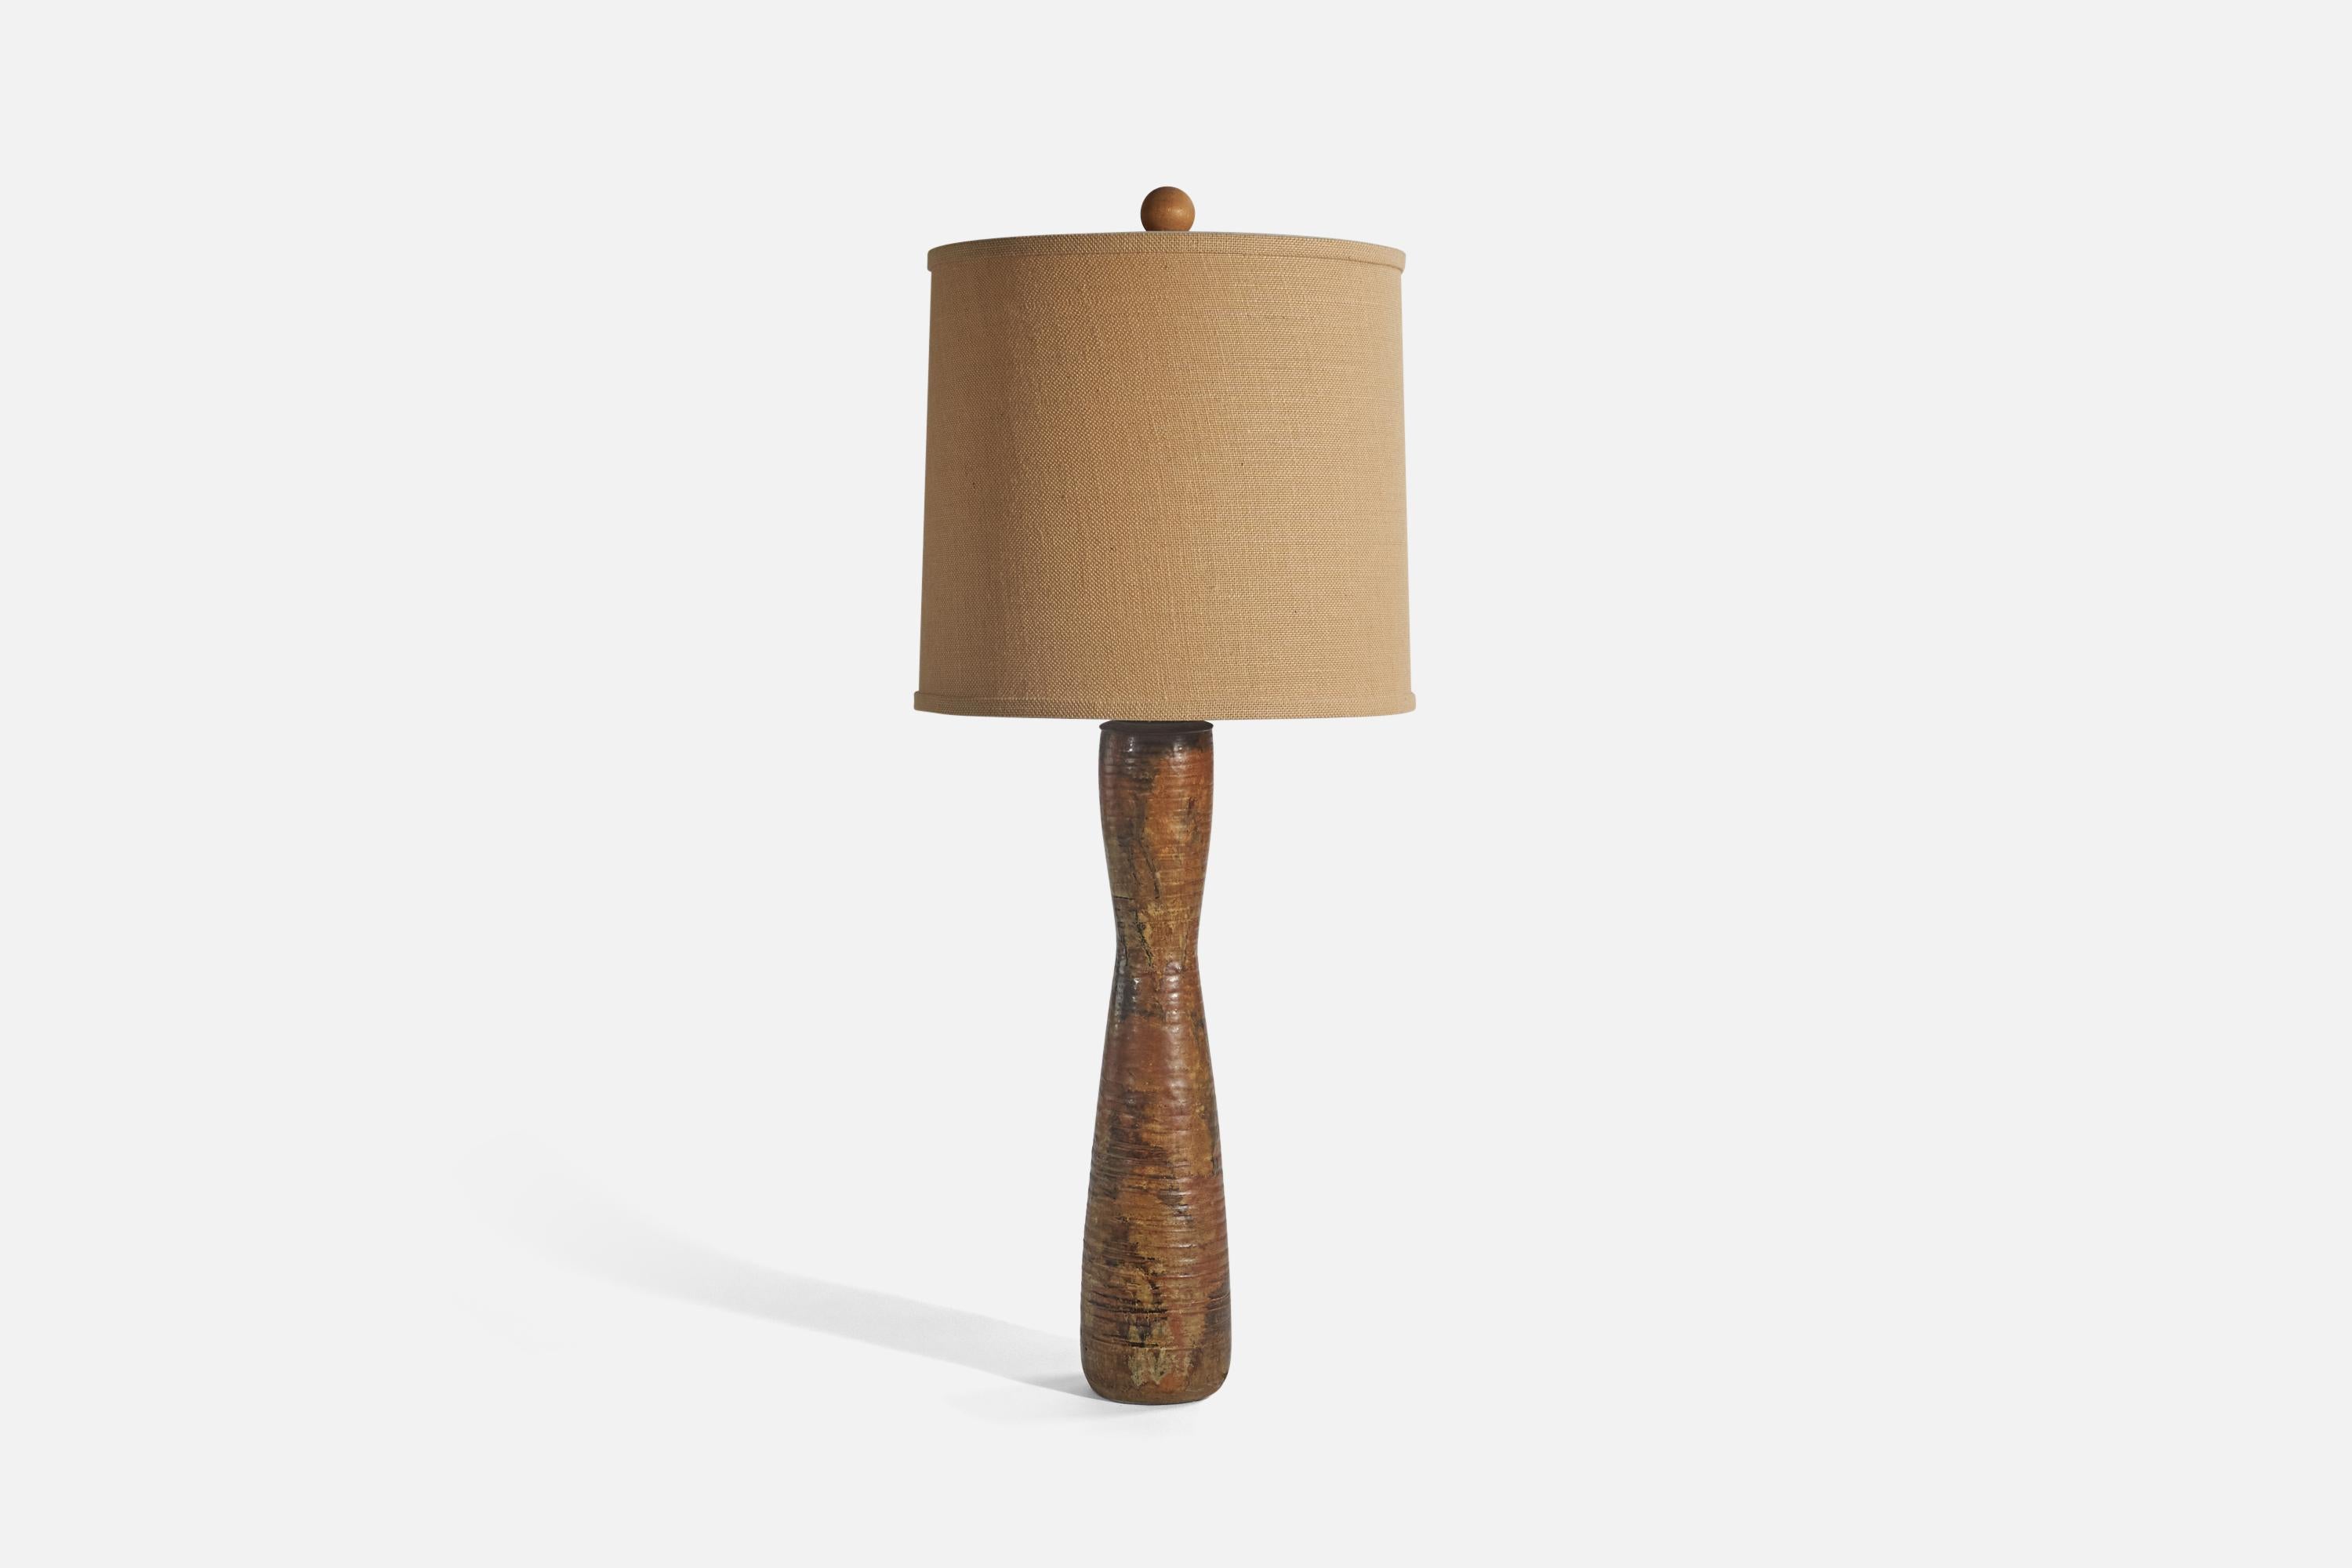 Mid-Century Modern American Designer, Table Lamp, Ceramic, Wood, Fabric, United States, 1950s For Sale